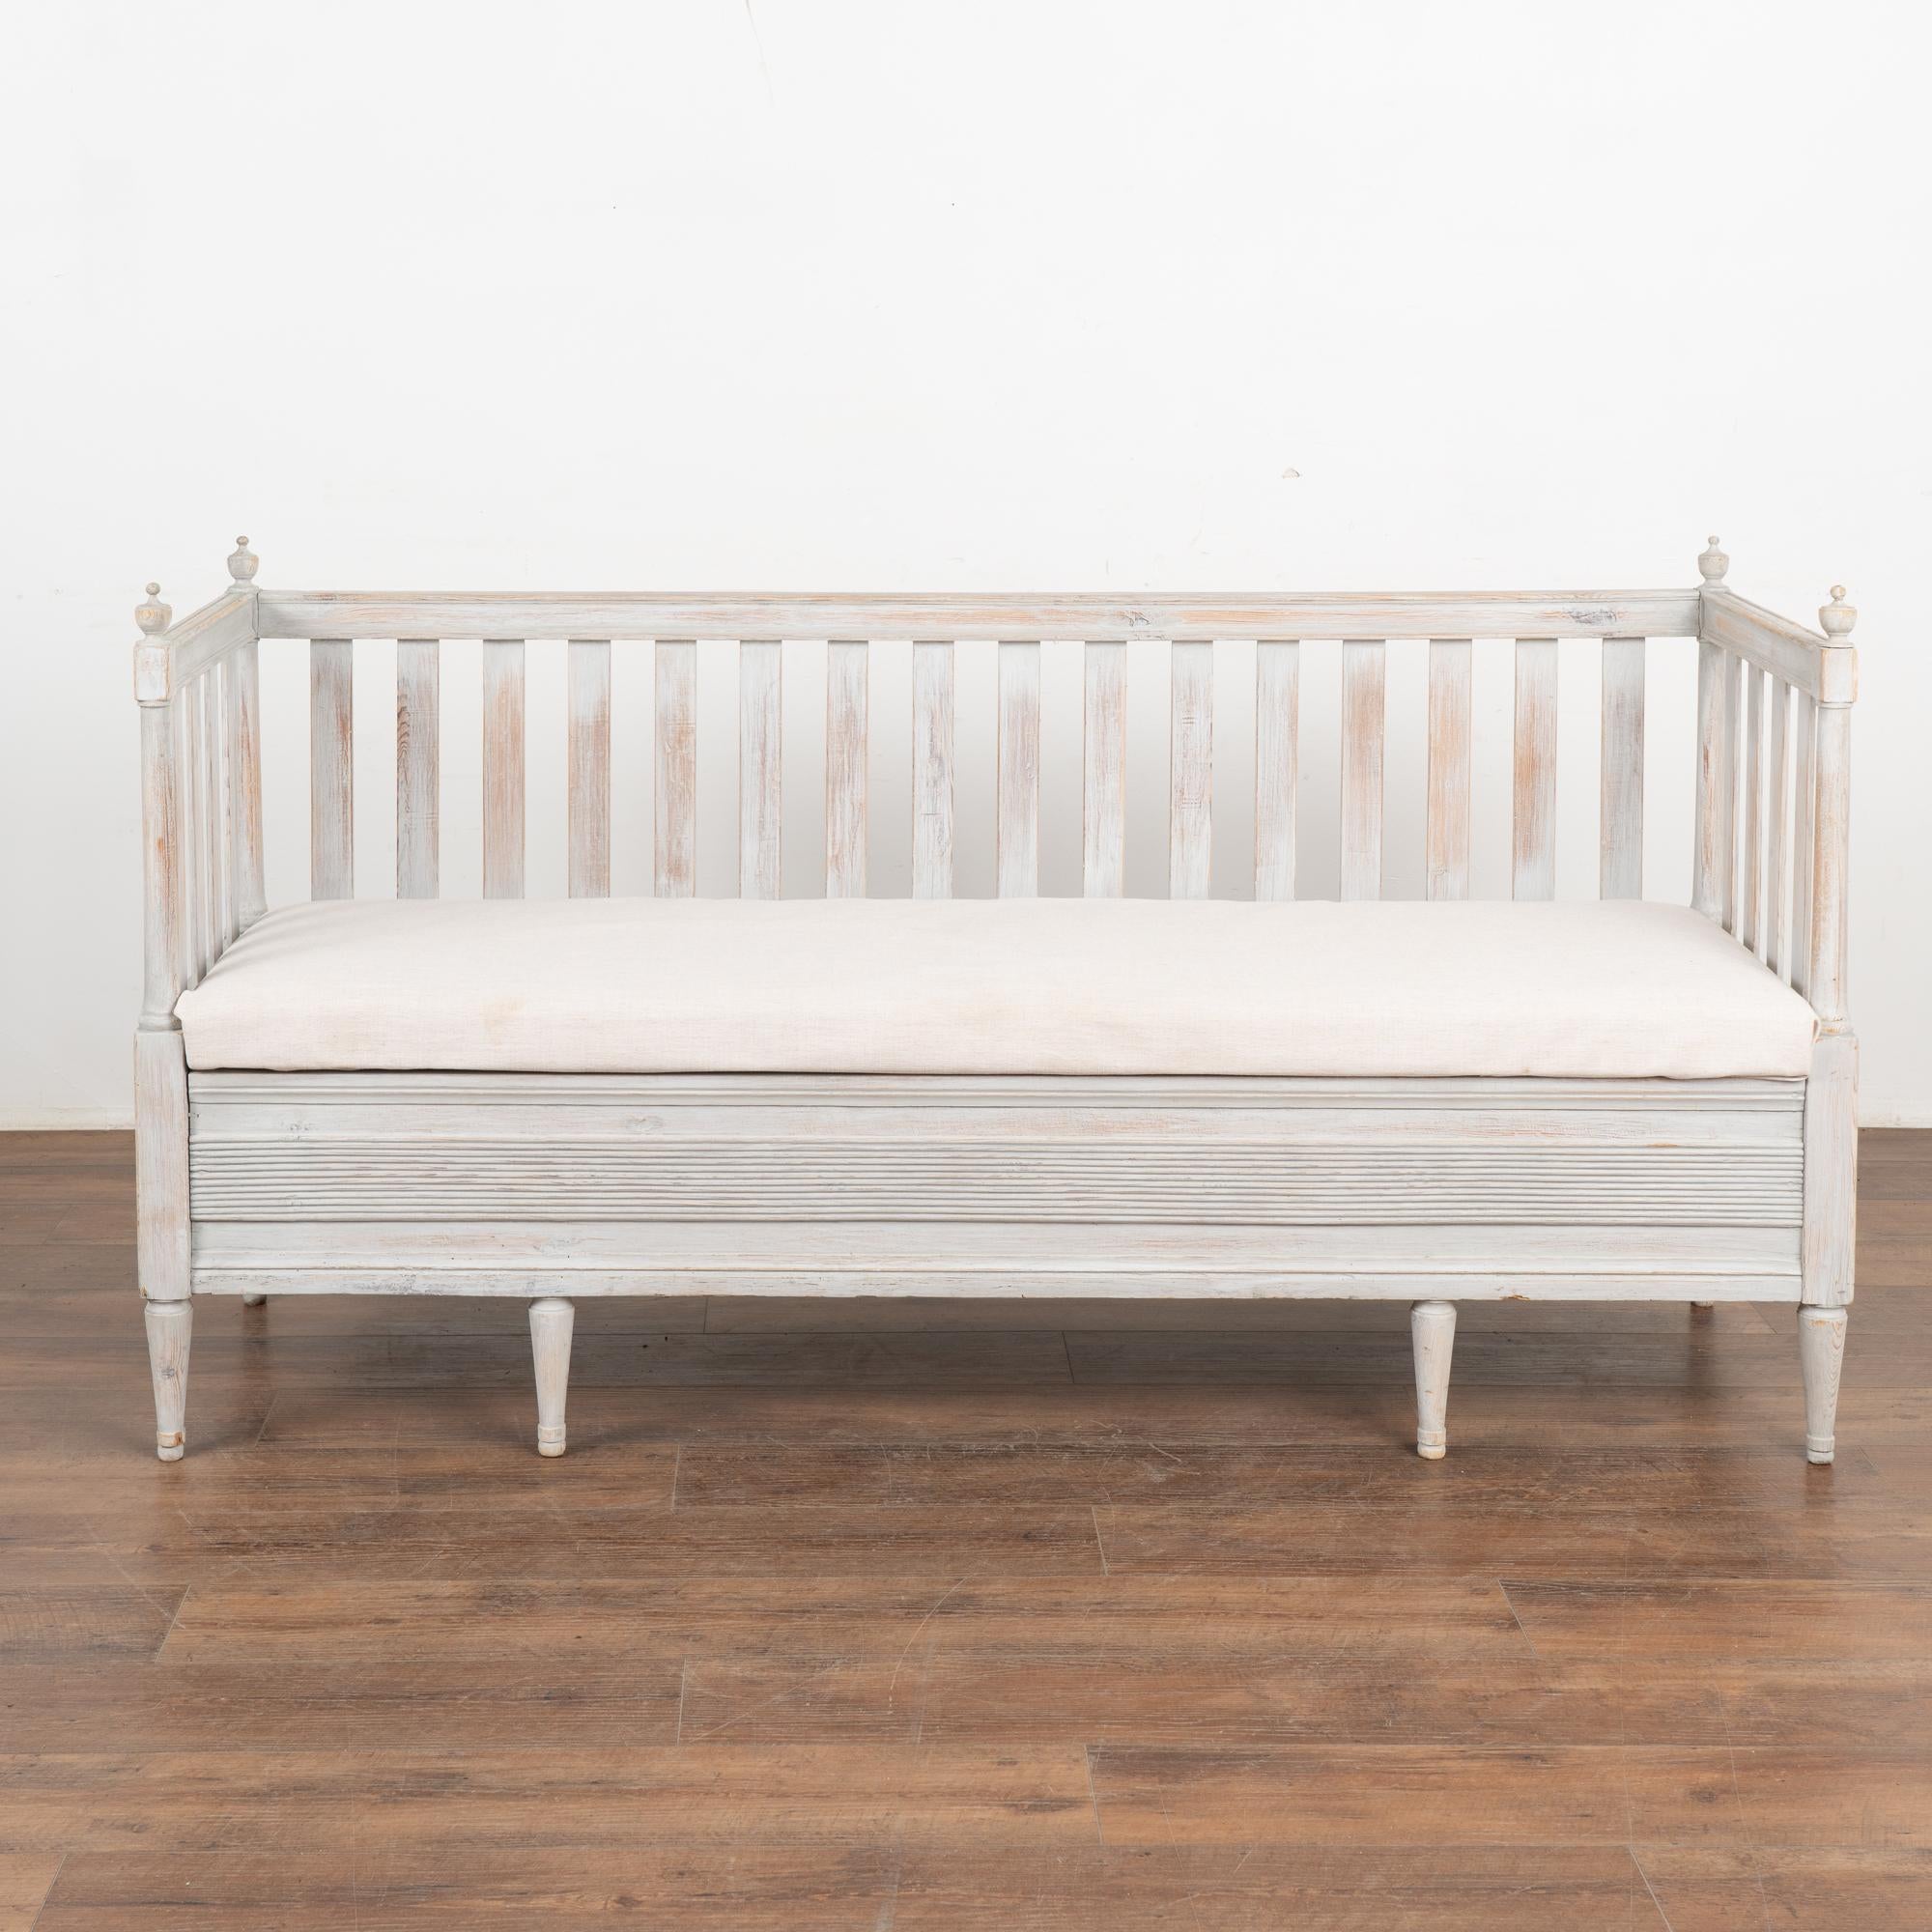 19th Century Gray Painted Gustavian Bench With Storage, Sweden circa 1840